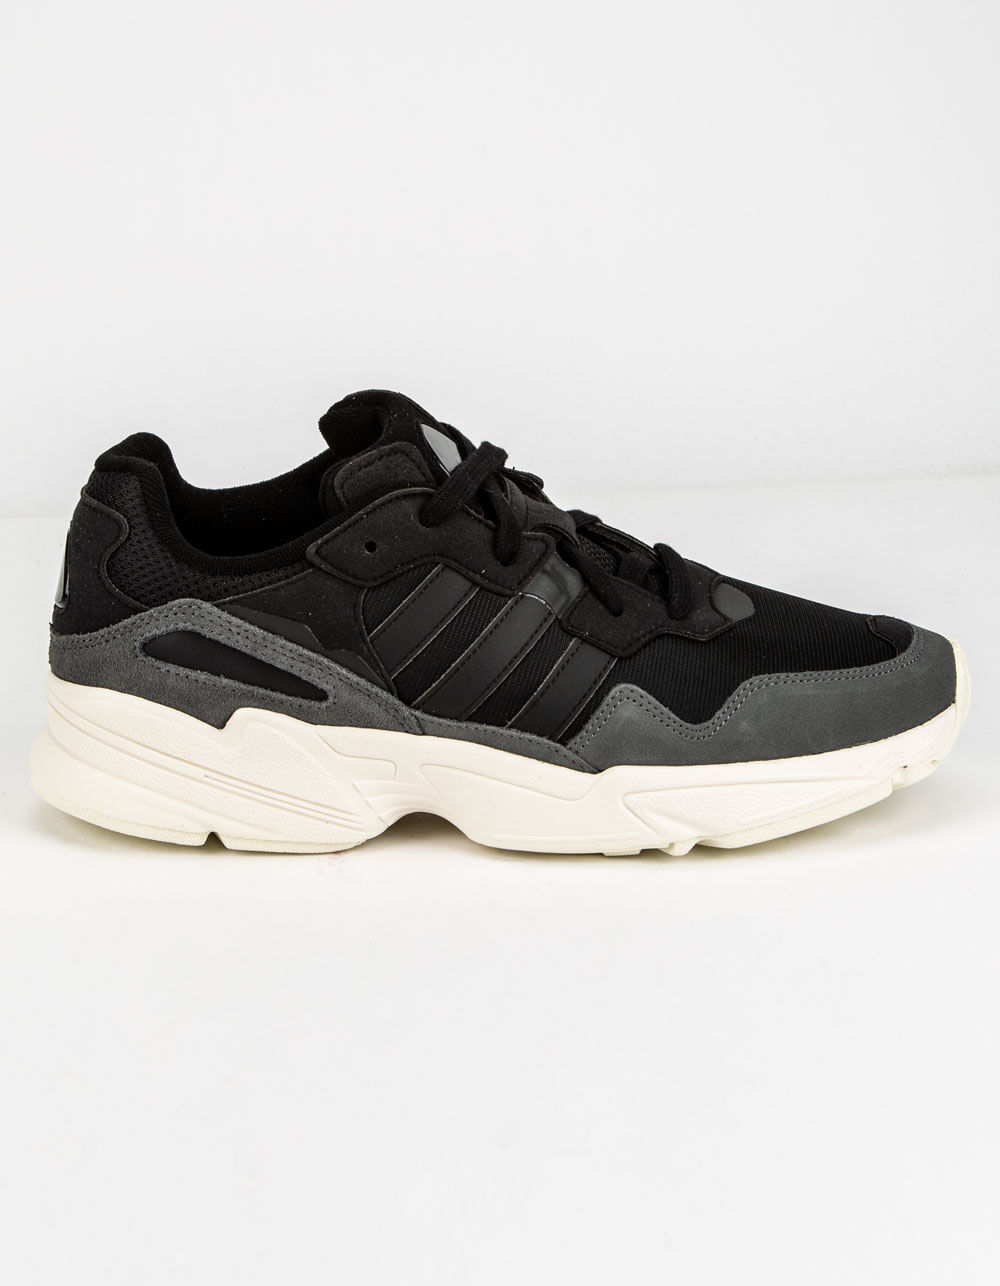 ADIDAS Yung-96 Core Black & Off White Shoes - CORE BLACK/OFF WHITE | Tillys